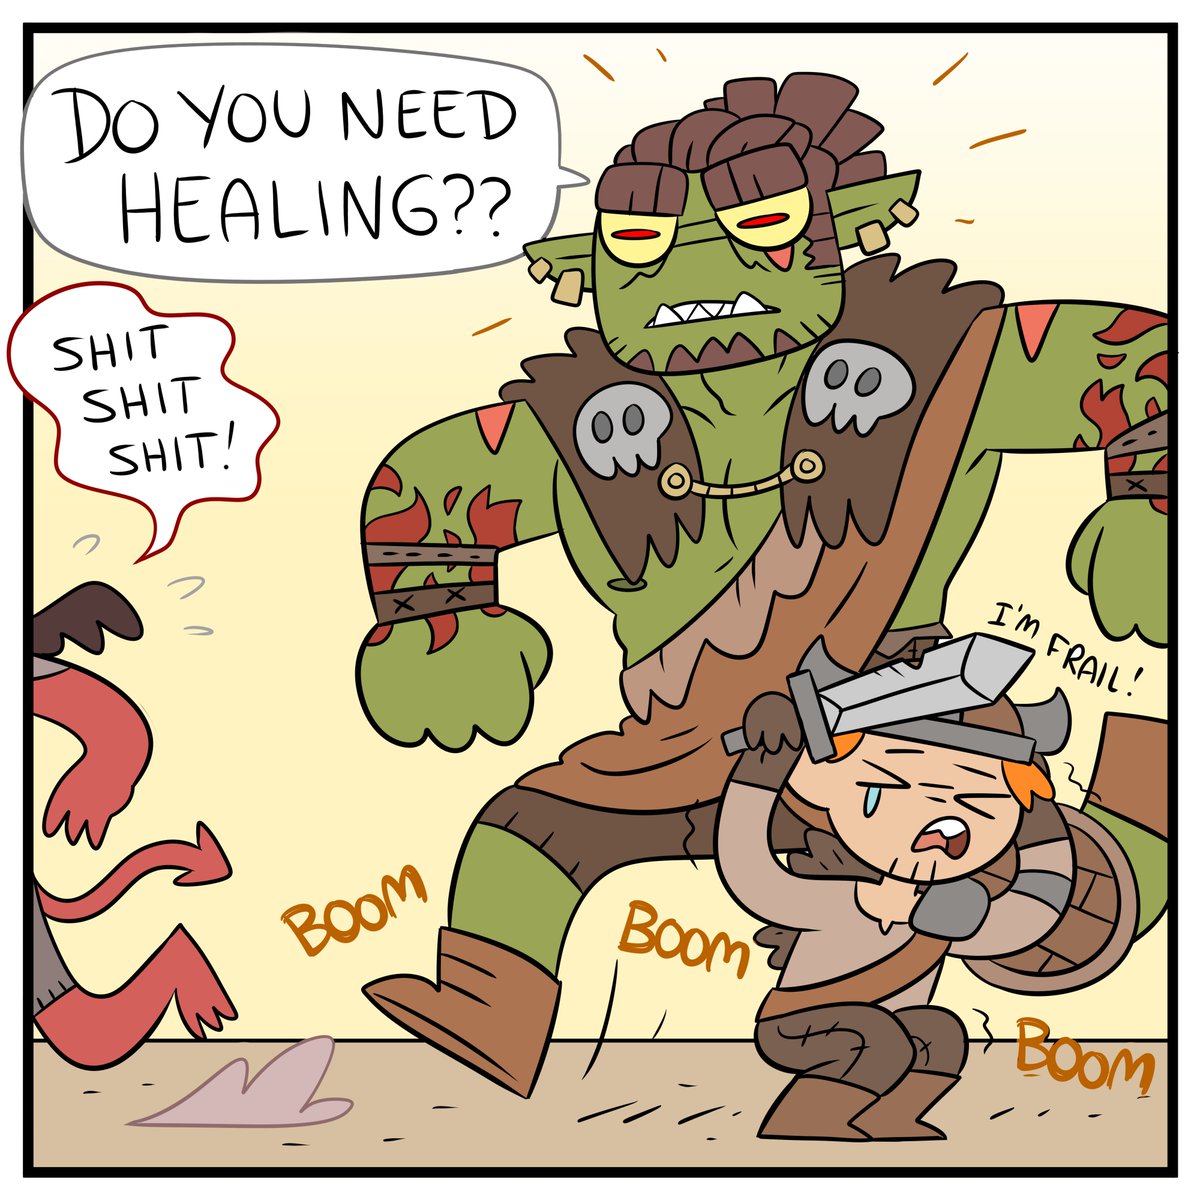 Continued the story of the weak warrior and the orc healer. https://t.co/F8mry82OCS 